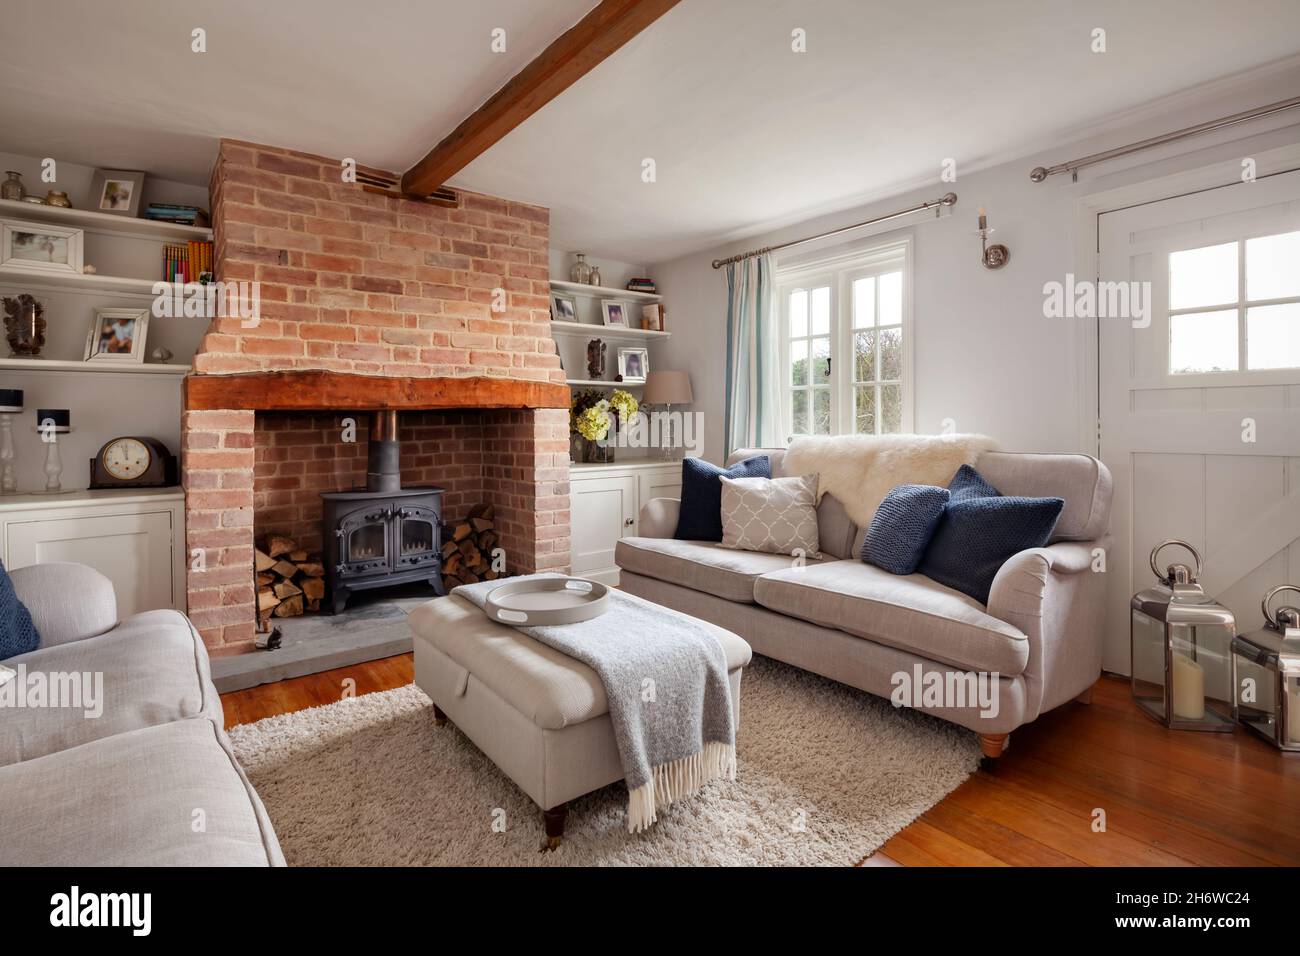 Calford Green, Suffolk, England - January 17 2020: Fully furnished cottage living room with log burner and exposed brick inglenook fireplace Stock Photo